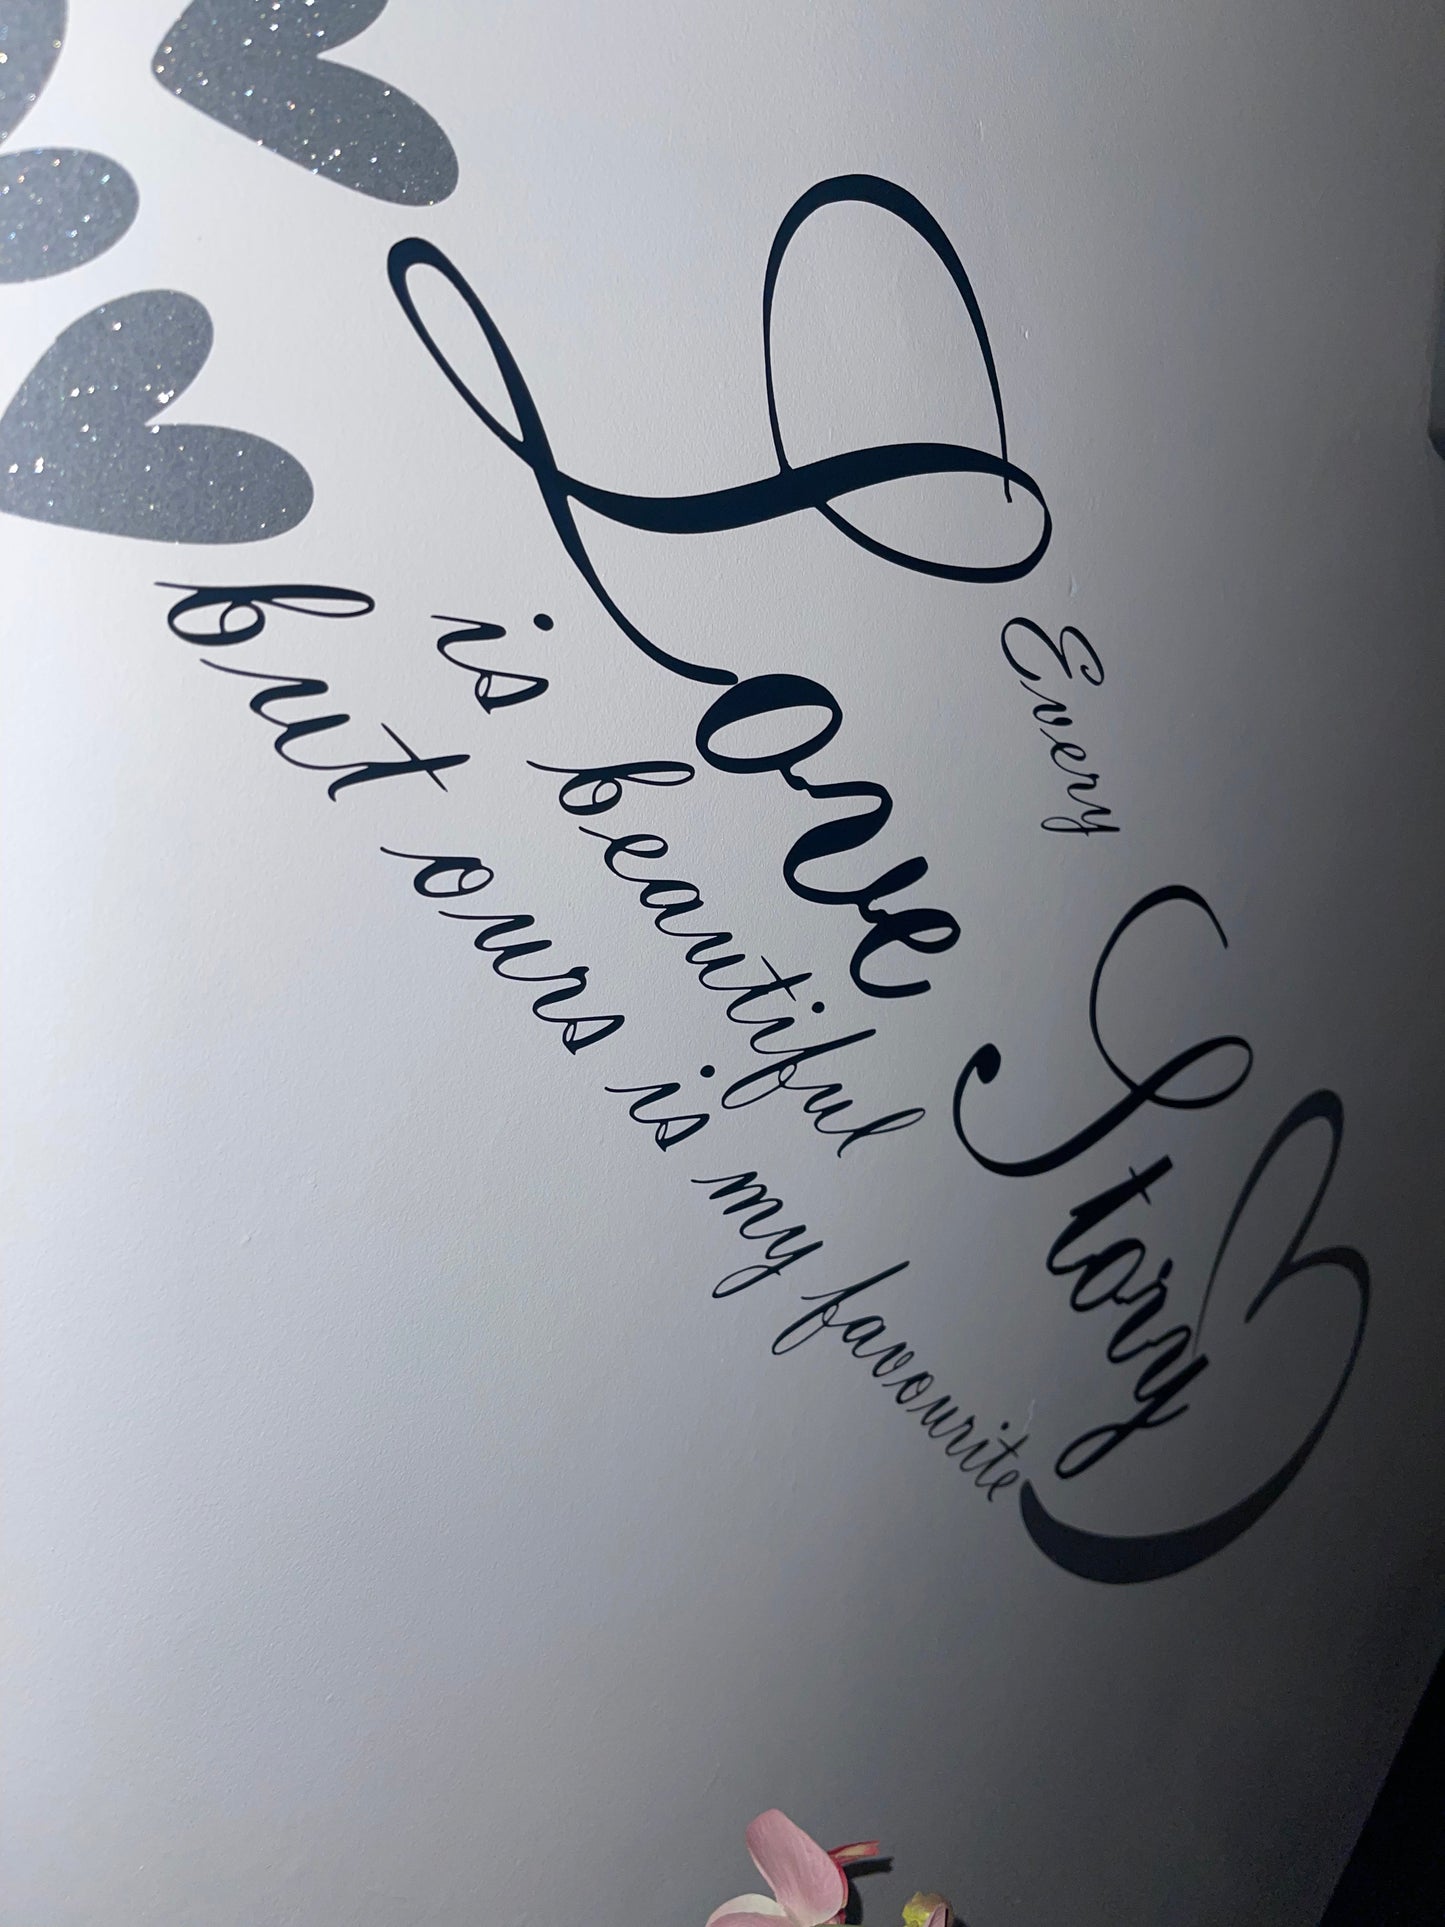 Every Love Story Is Beautifu But Ours Is My Favorite Wall Art Decal Sticker - rewrapsandgraphics